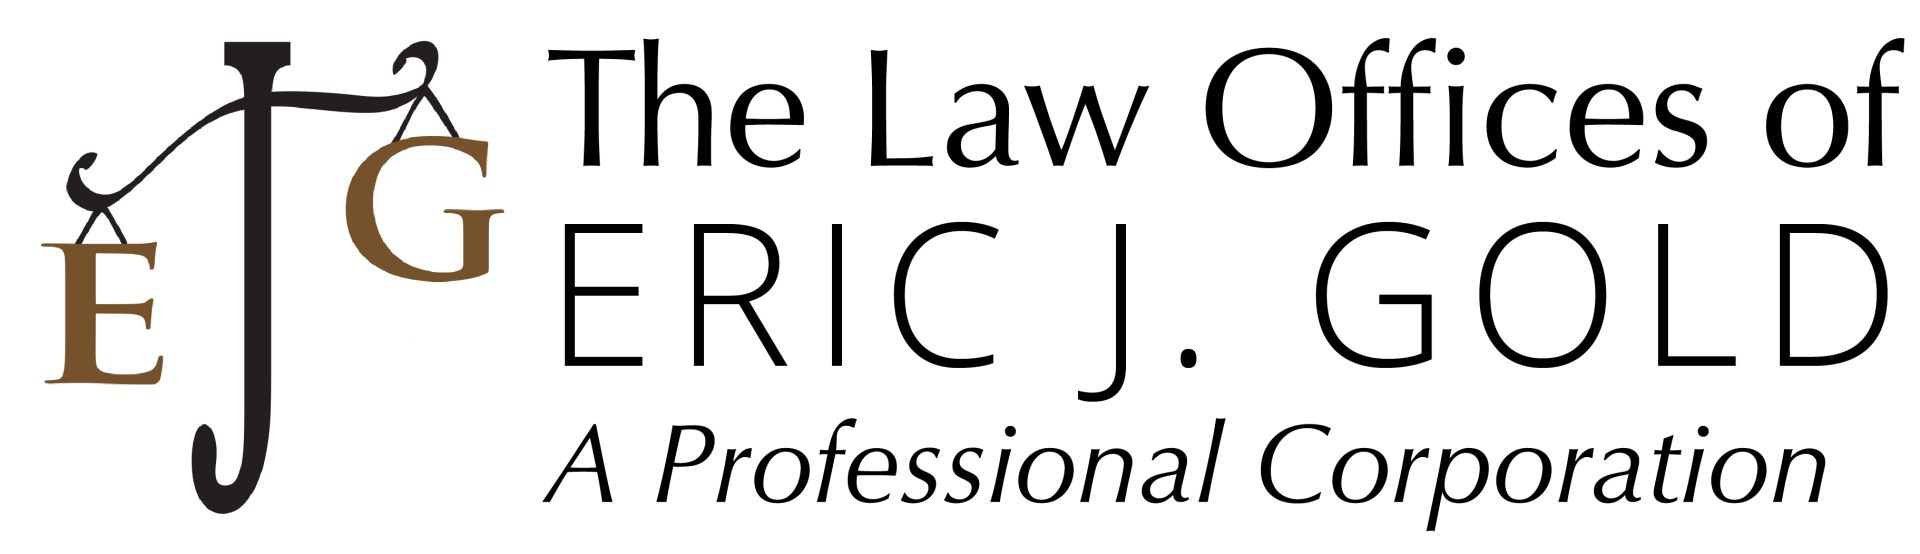 The Law Offices of Eric J. Gold, APC Logo